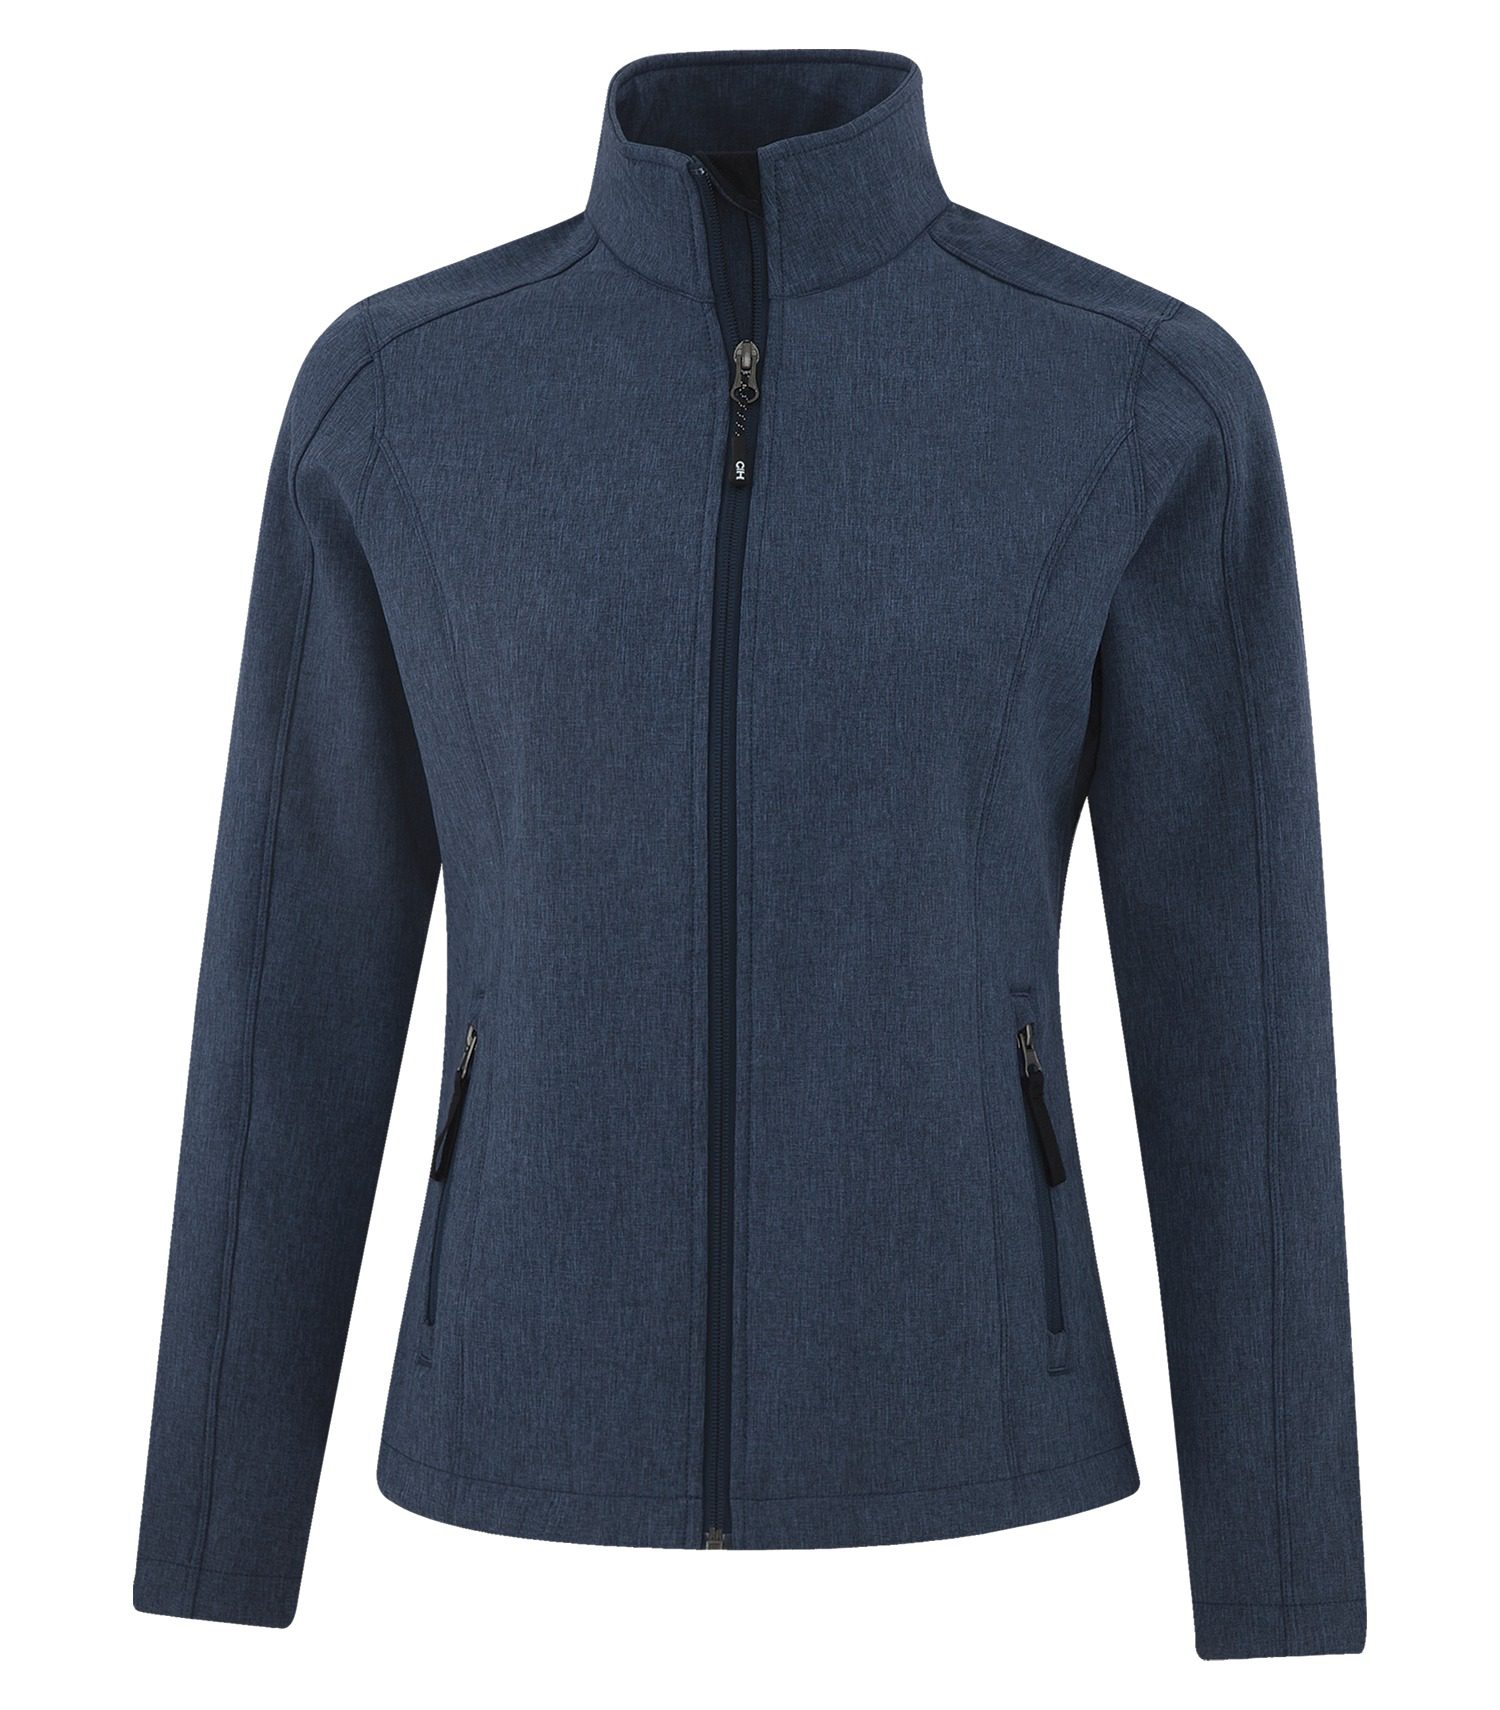 COAL HARBOUR EVERYDAY WATER REPELLENT SOFT SHELL LADIES' JACKET #L7603 Navy Heather